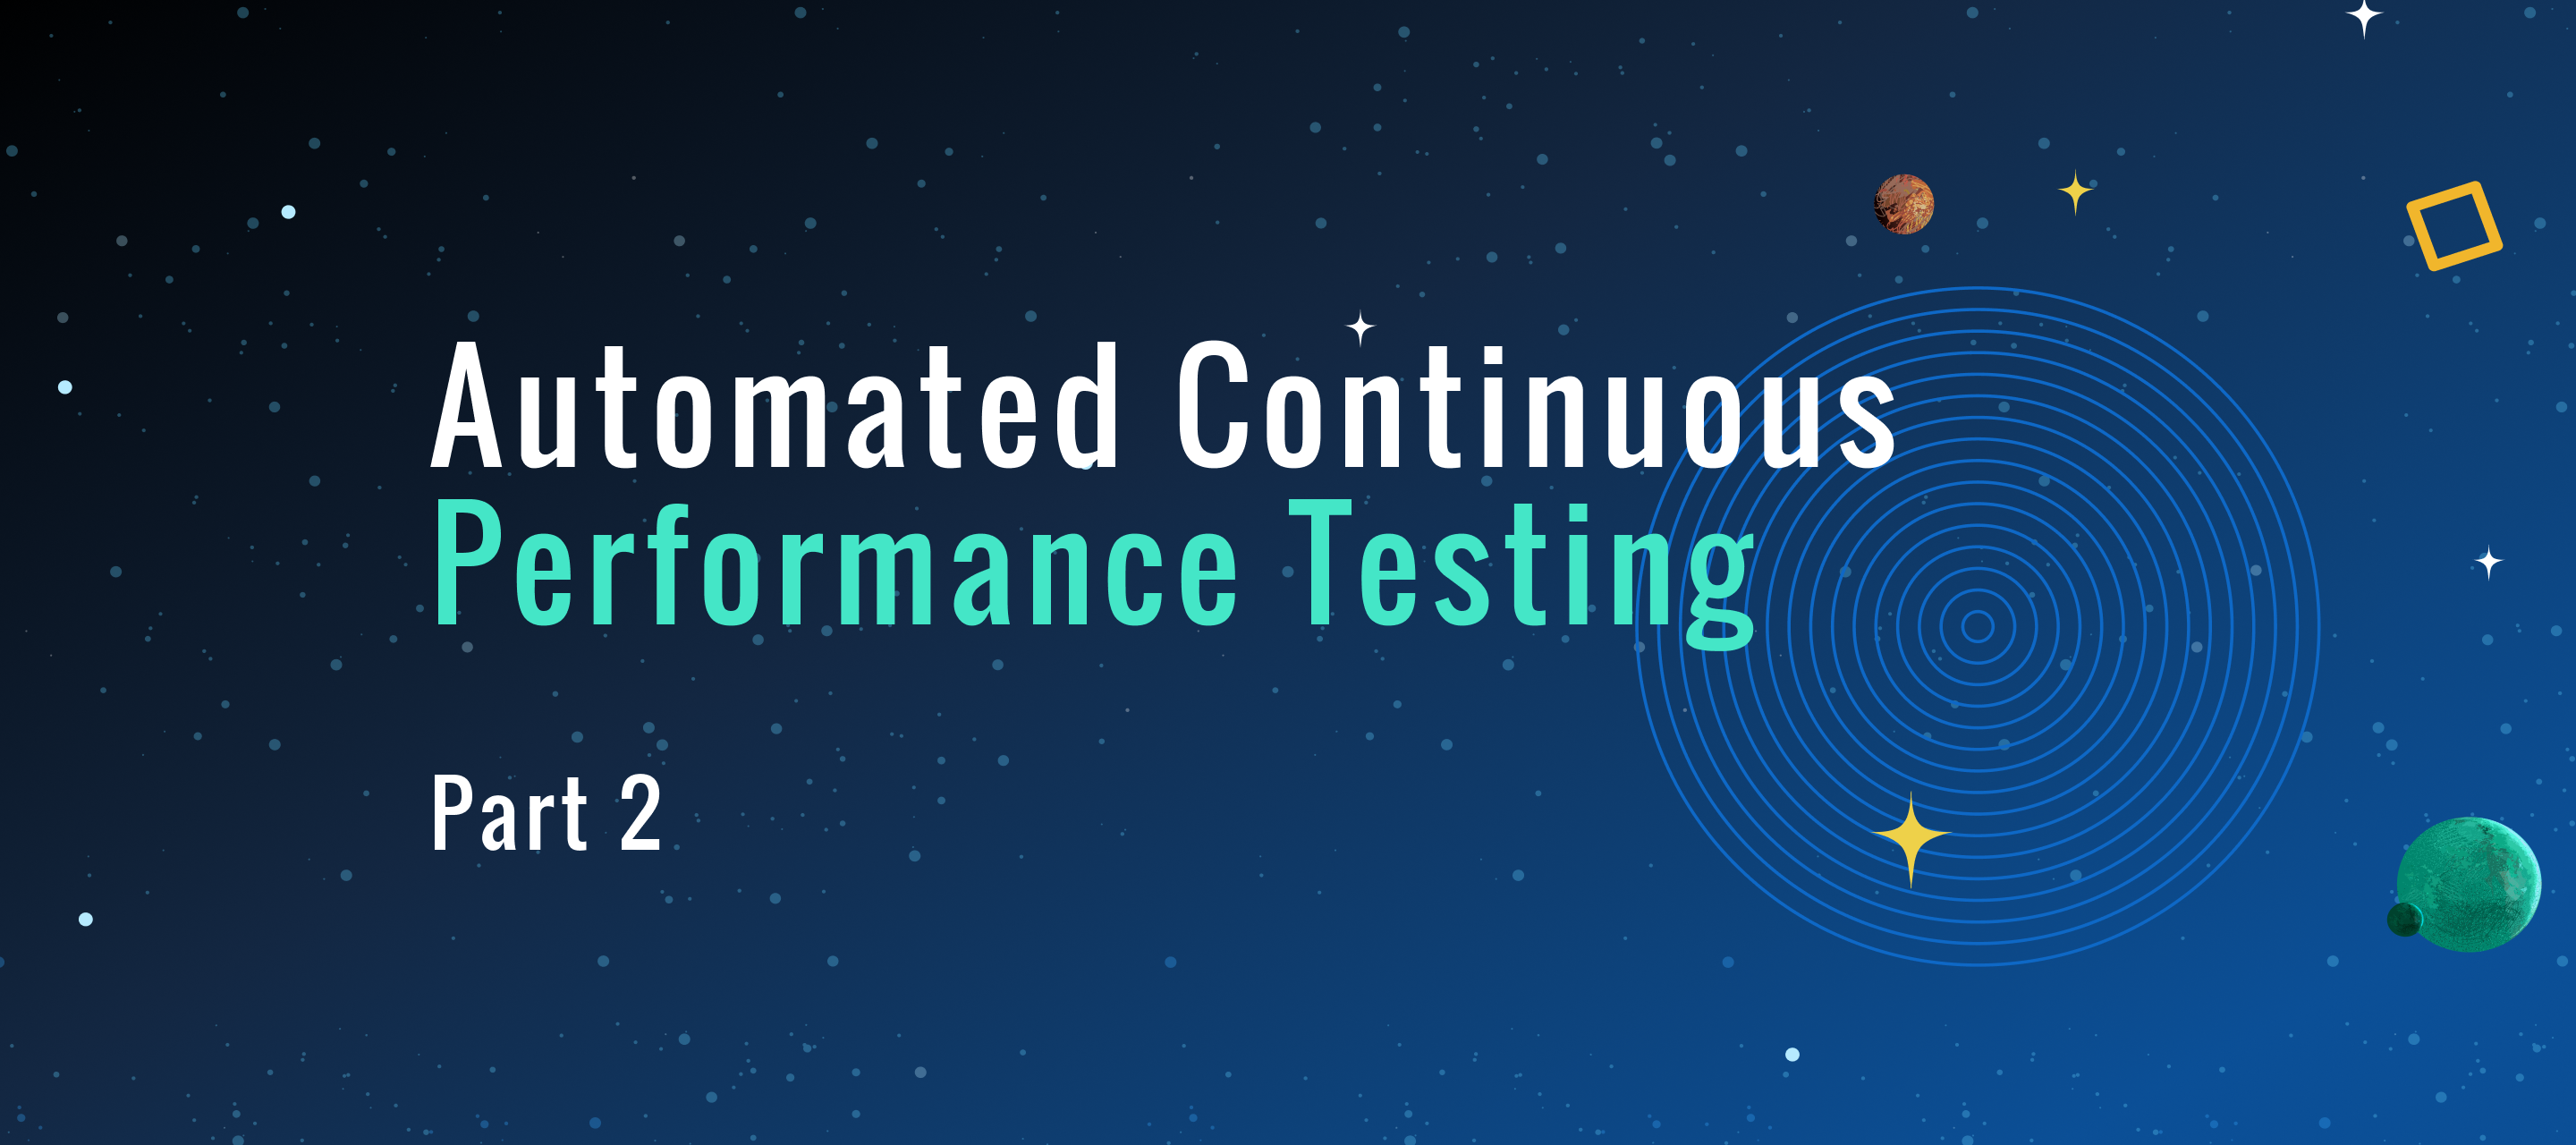 3 killer anti-patterns in continuous performance testing